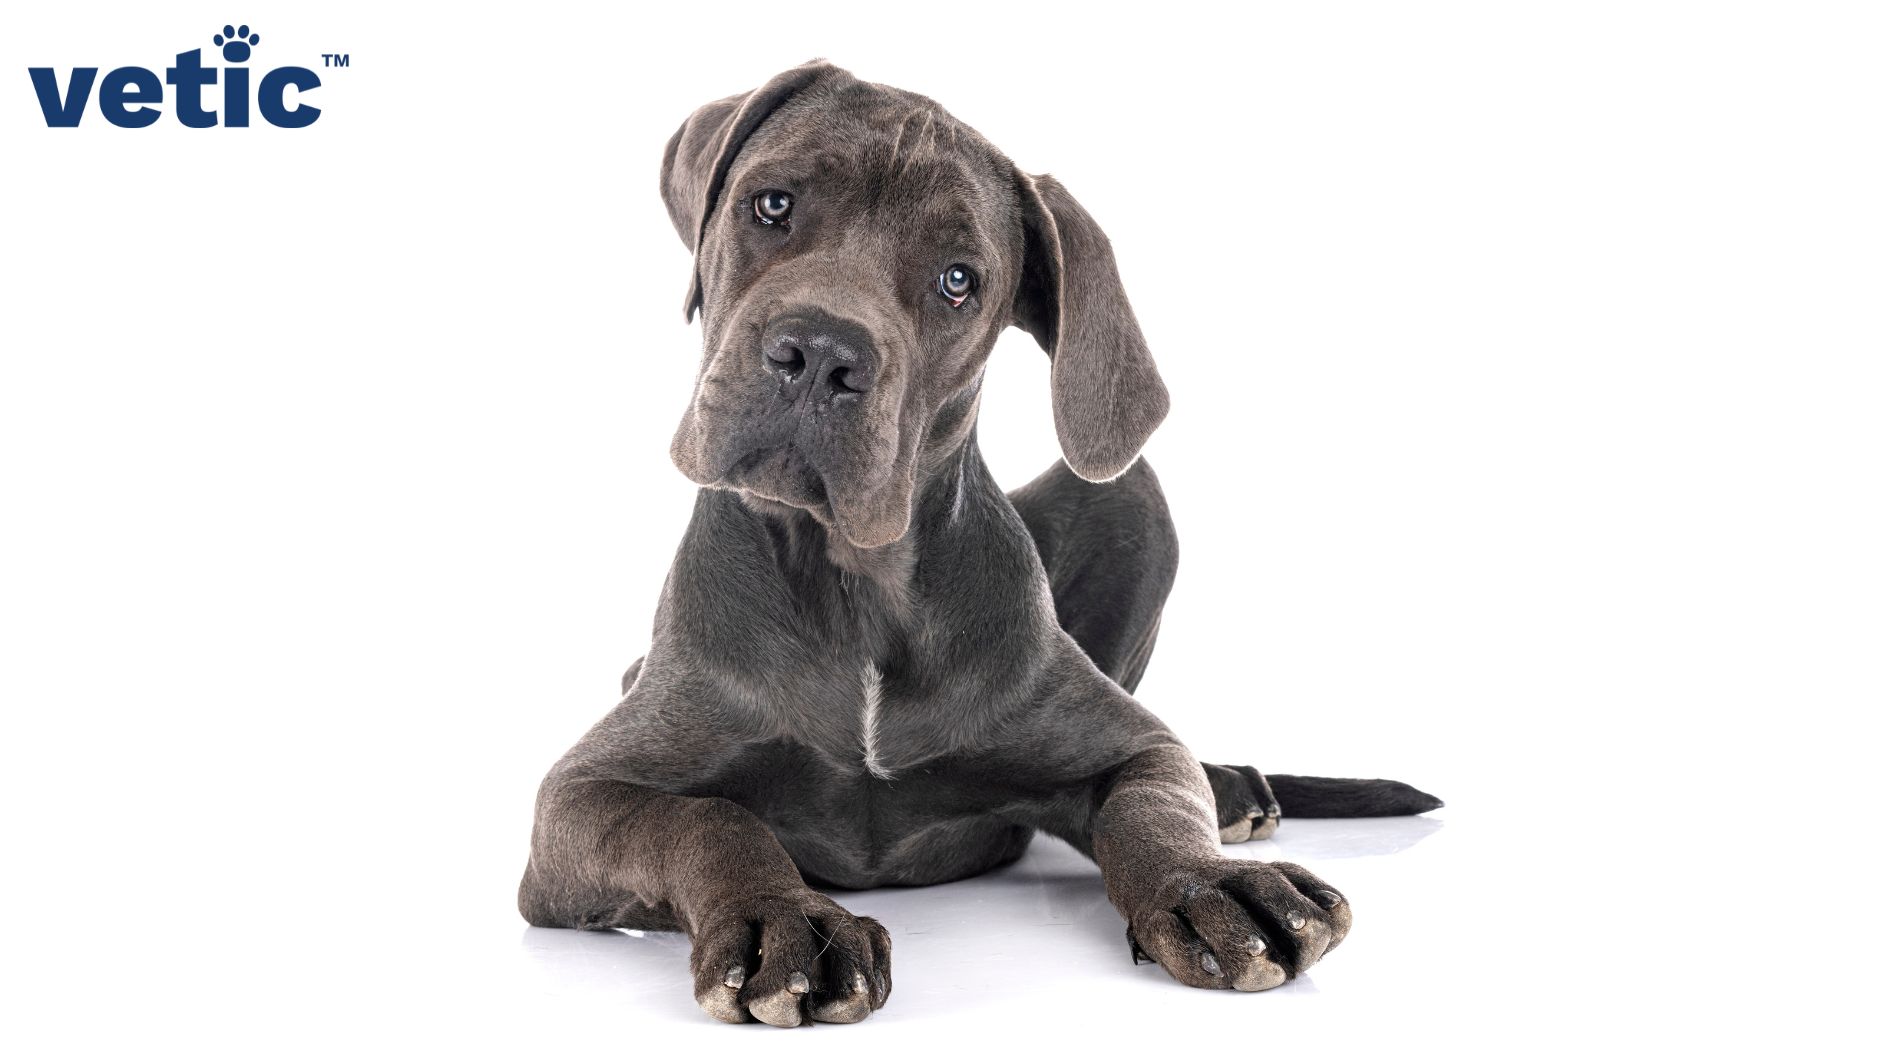 One Great Dane puppy looking directly at the camera with a slight head tilt. The puppy has grey-brown eyes and a white line along the mid-central chest and large paws. Hip dysplasia in dogs is particularly common among larger breeds